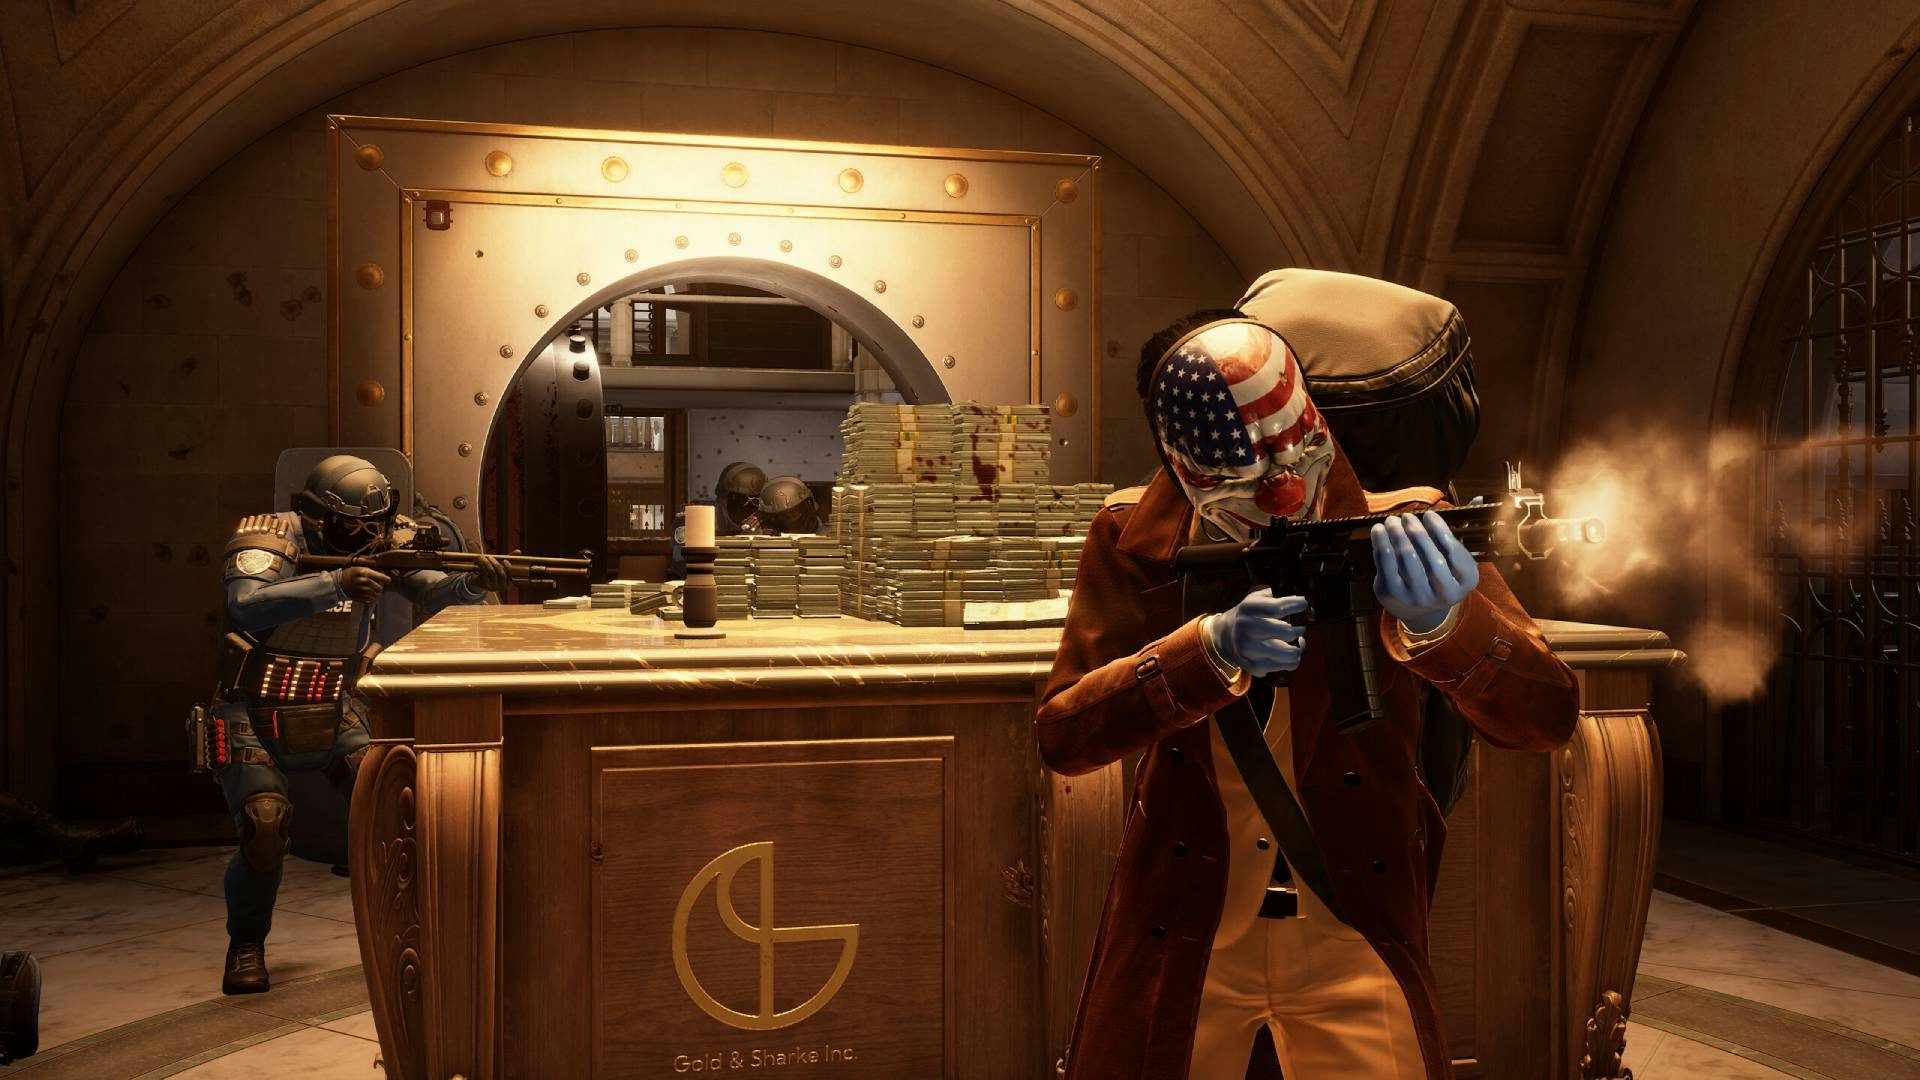 What are your Payday 3 first impressions? Tell us for $2!